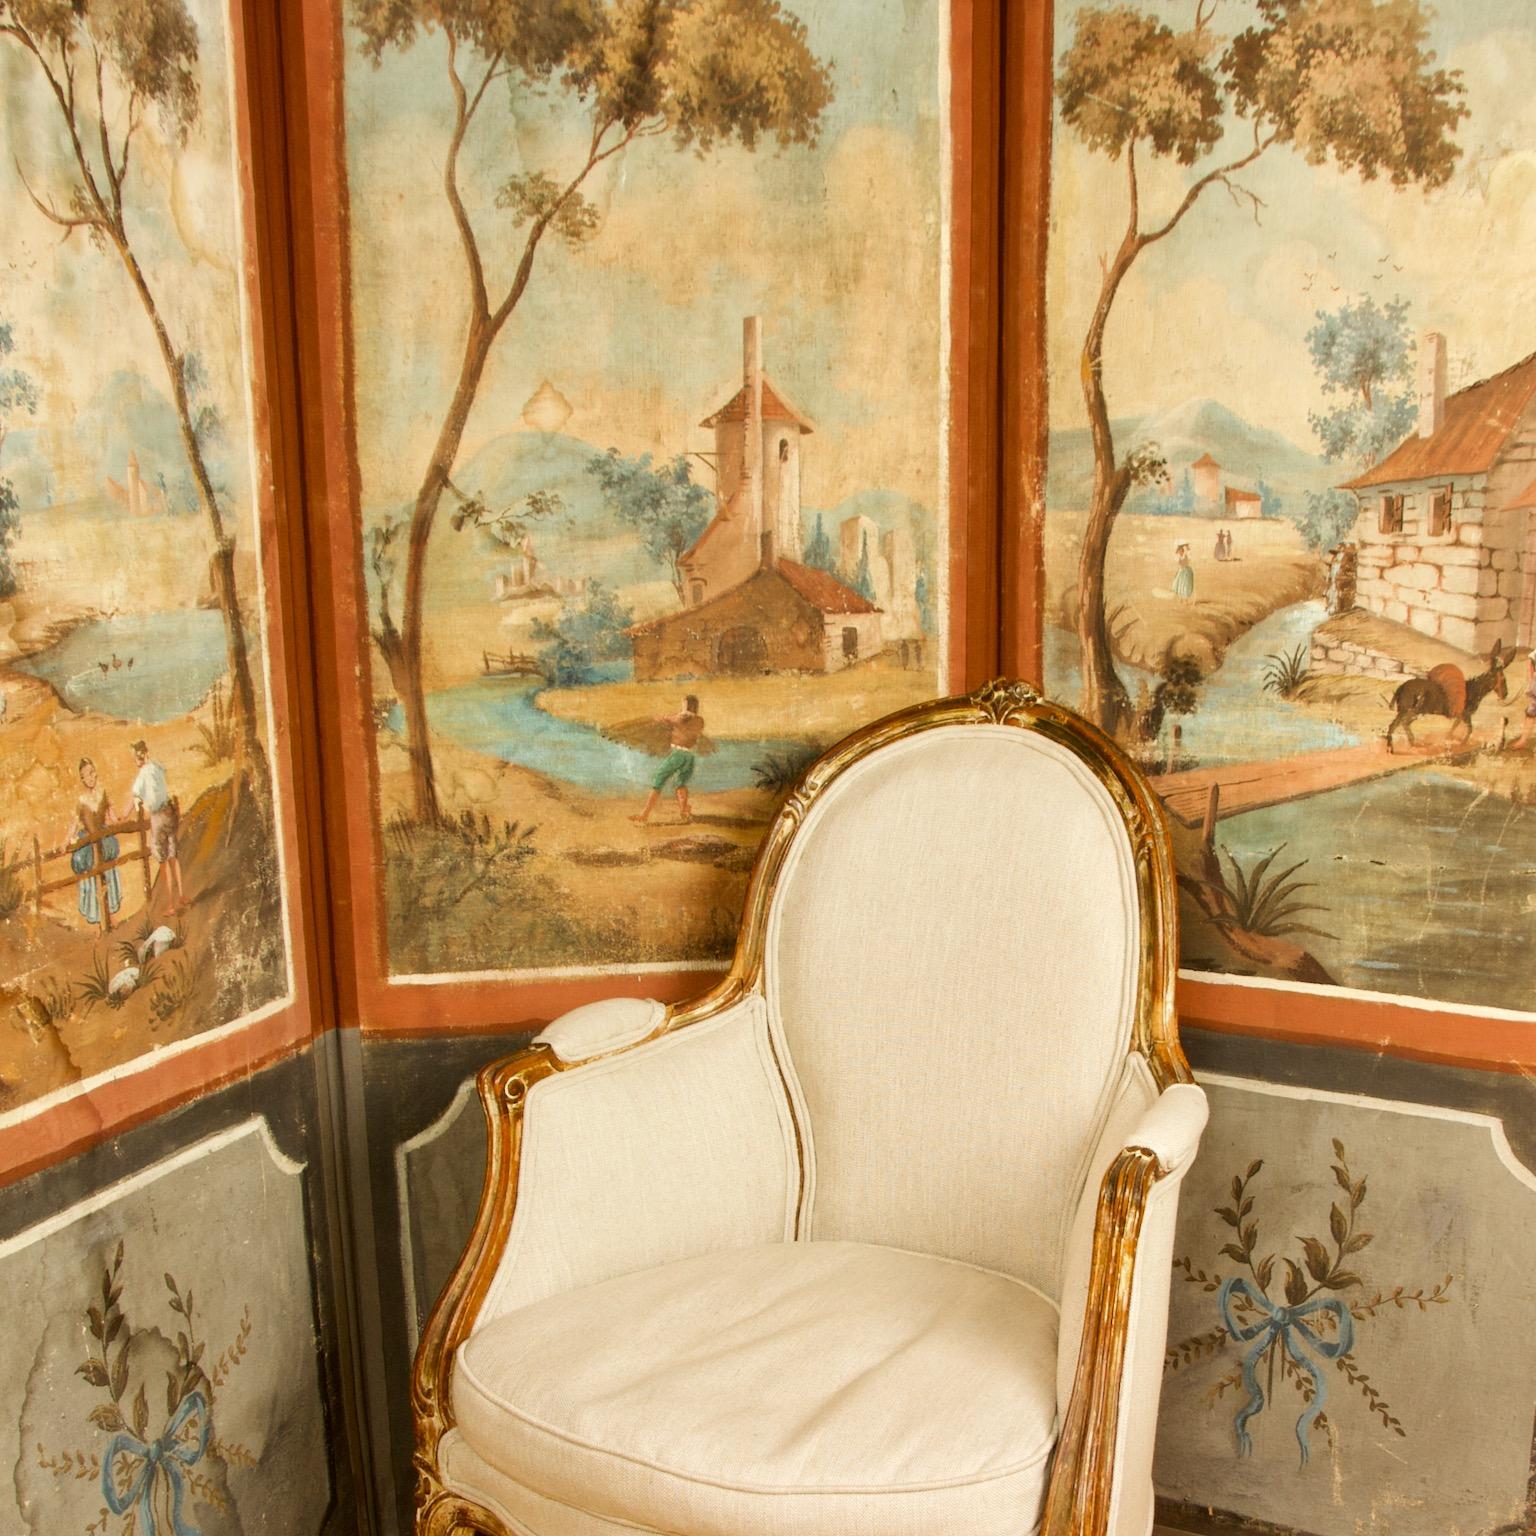 French 18th Century Southern Landscapes Three-Leaf Folding Screen or Paravent

Charming French late 18th century three-leaf screen or paravent made of hand painted burlap on wooden frames connected and held together by cloth: each leaf comprising